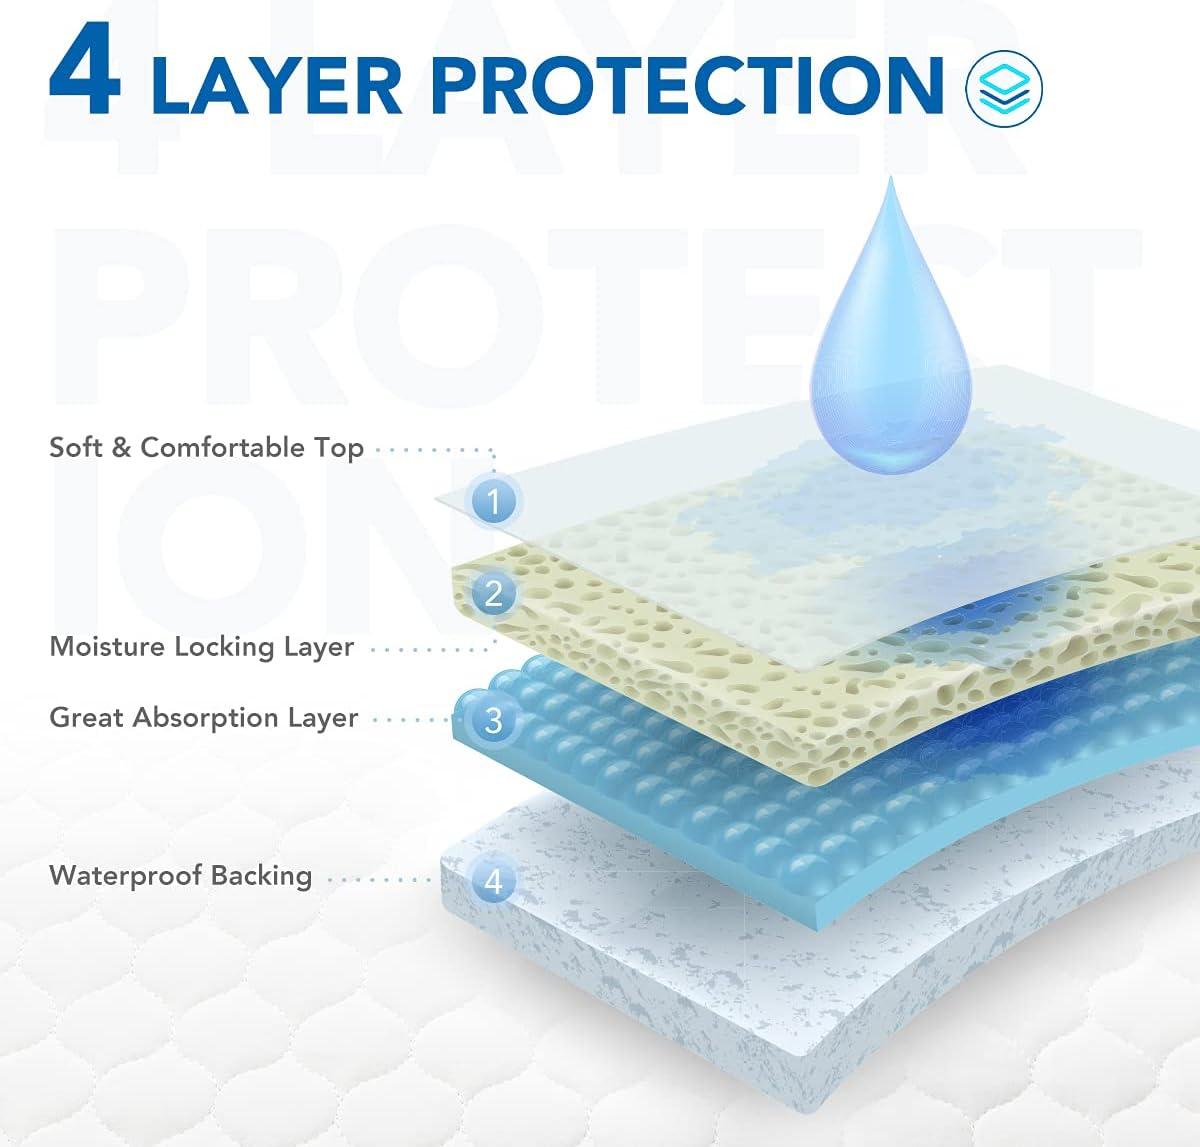 Positioning Reusable Bed Pad Without Handles 34 x 36 / 2 Pack